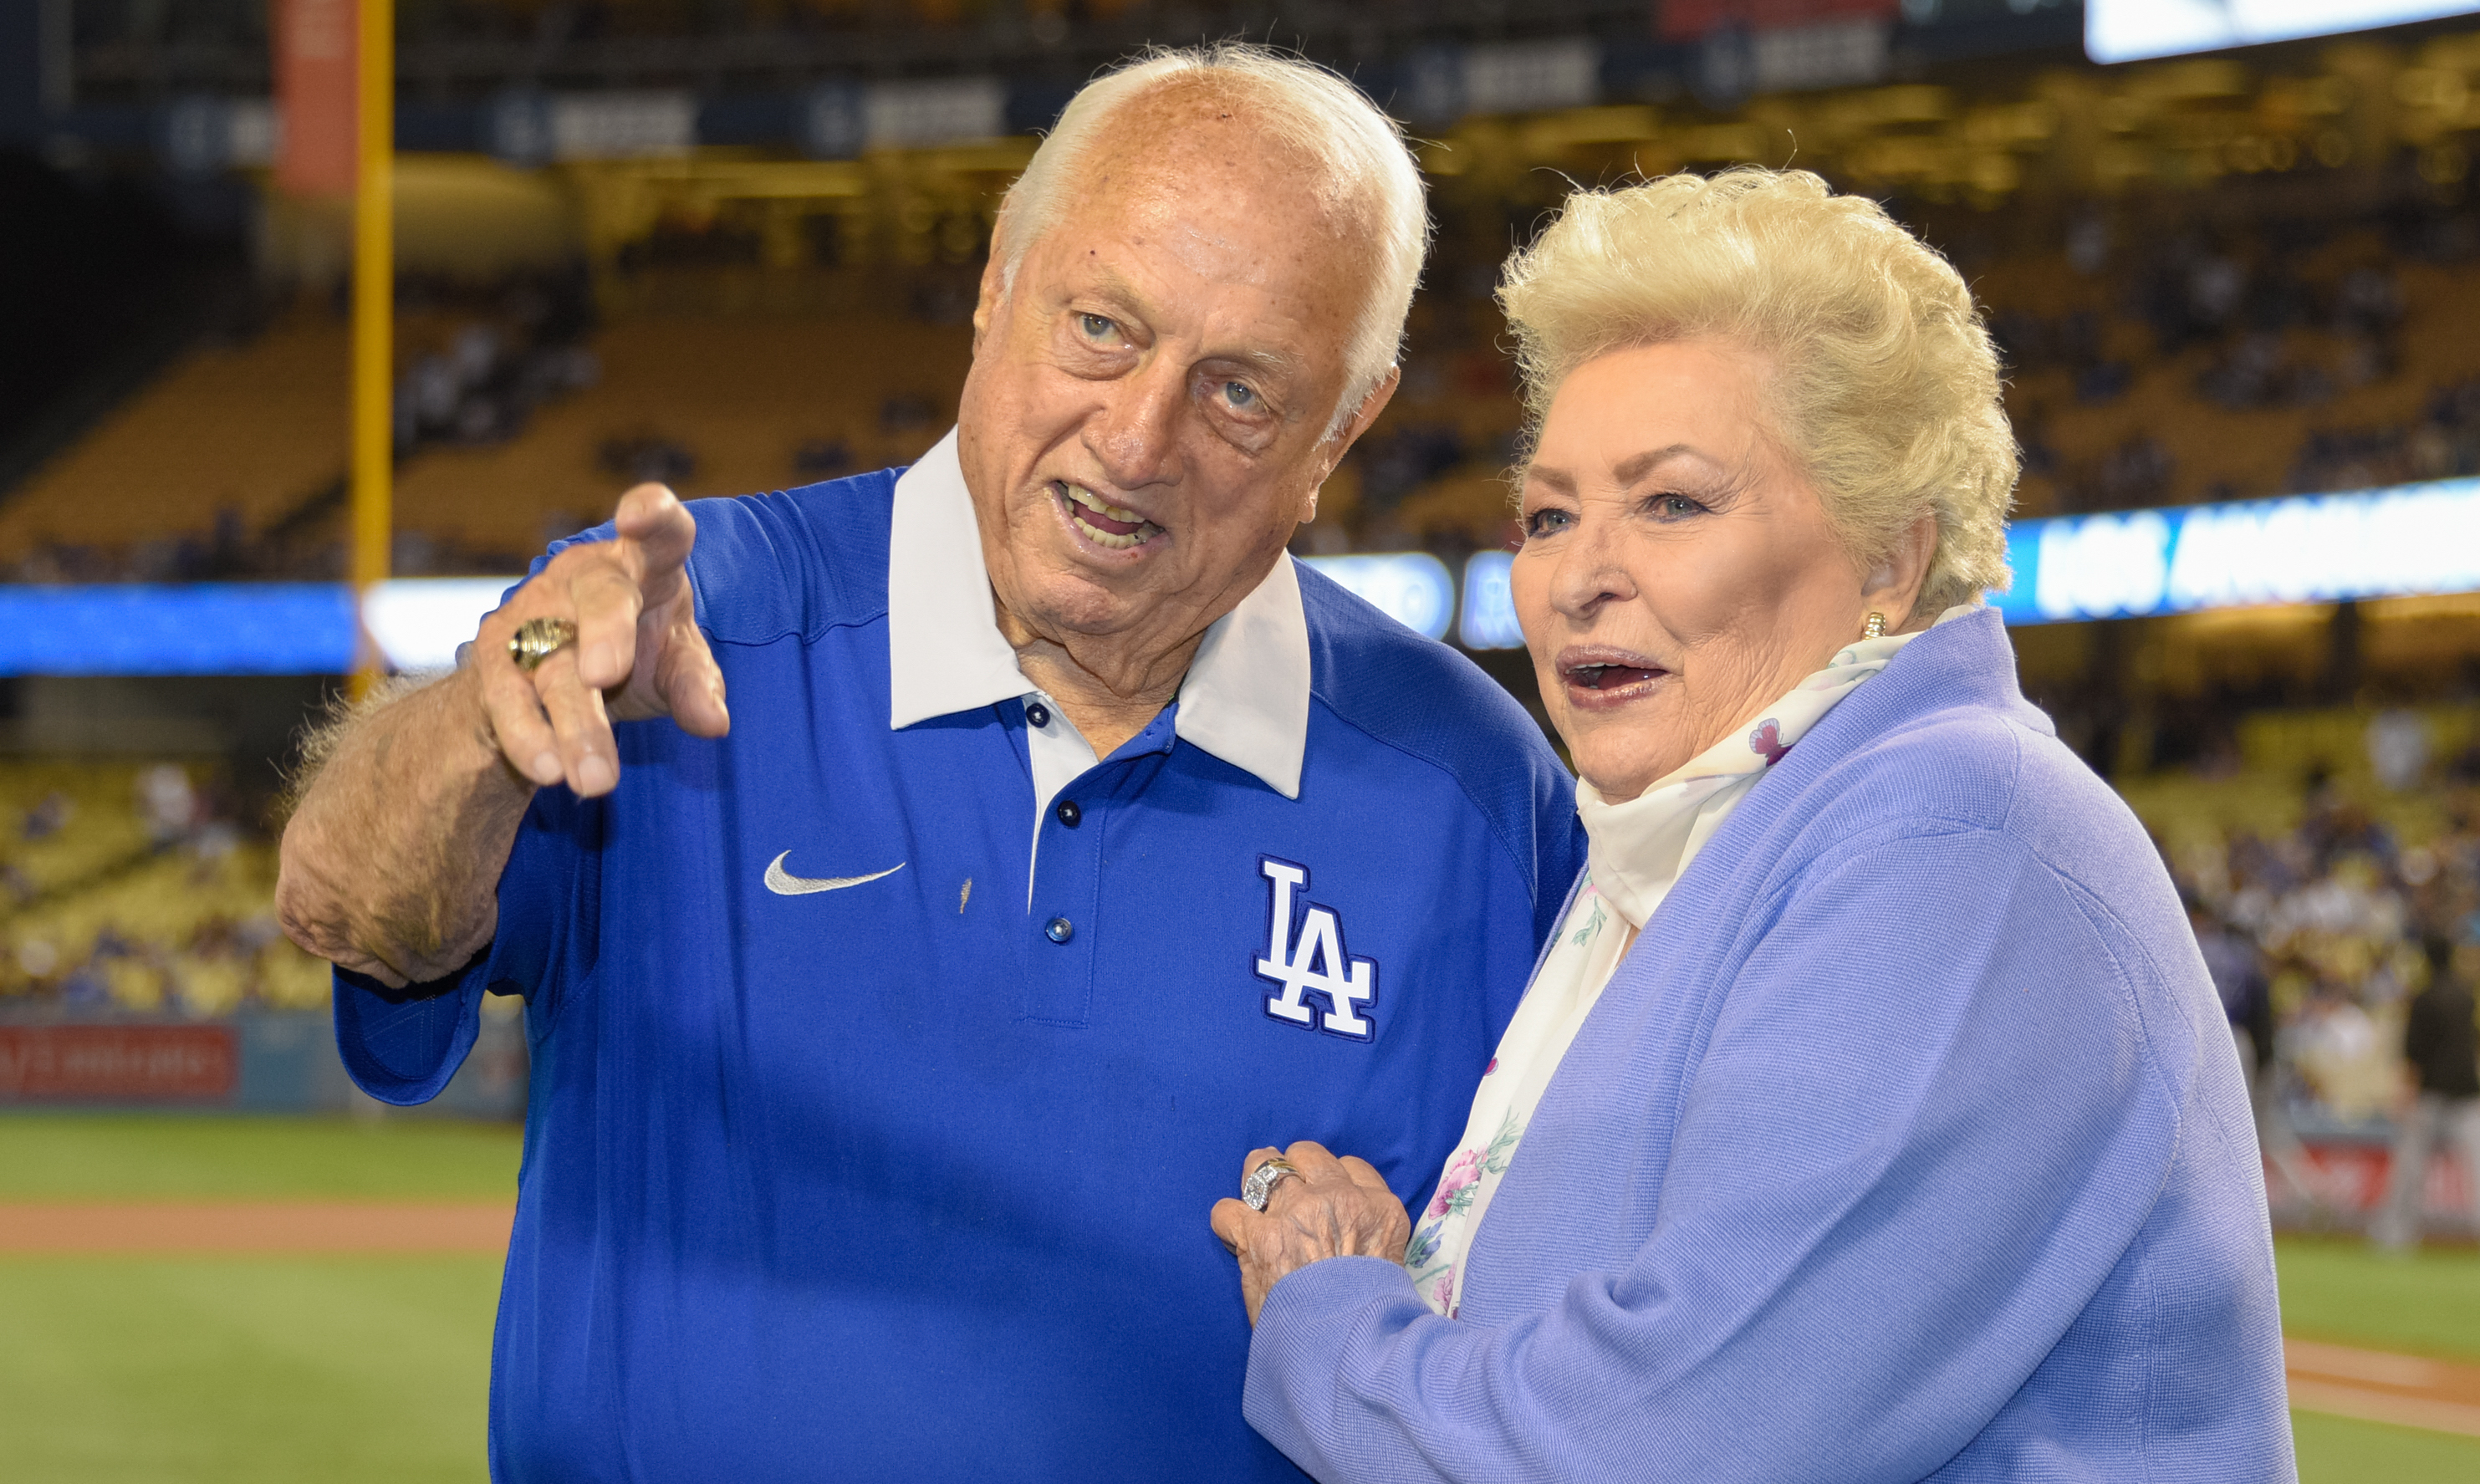 Jo Lasorda, Widow of Dodgers Hall of Fame Manager Tommy